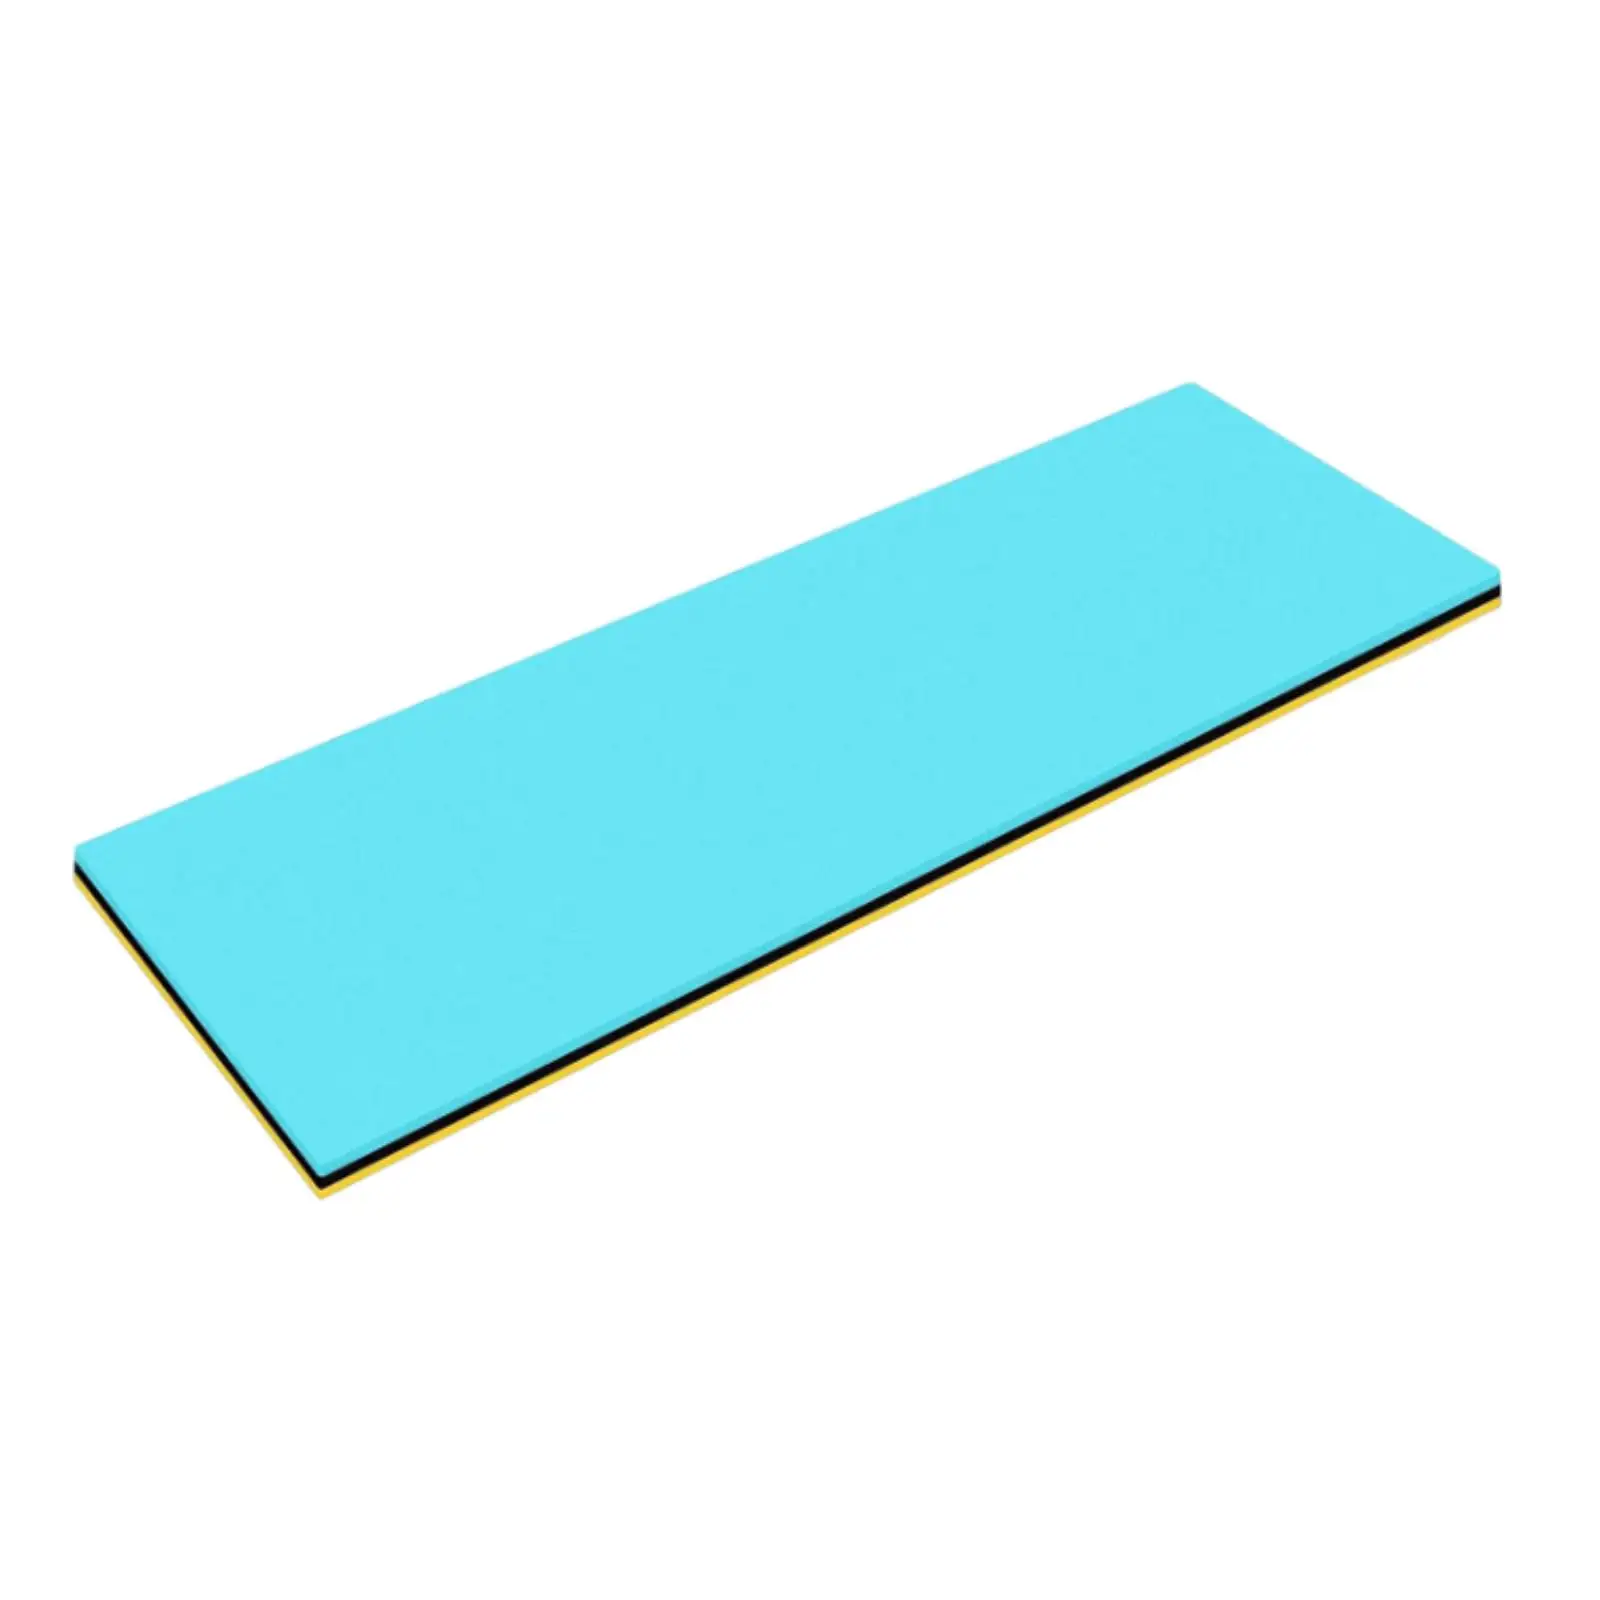 Water Float Mat Comfortable Float Raft High Density Play Float Mat Bed Floats Mattress for Lake River Boating Beach Outdoor